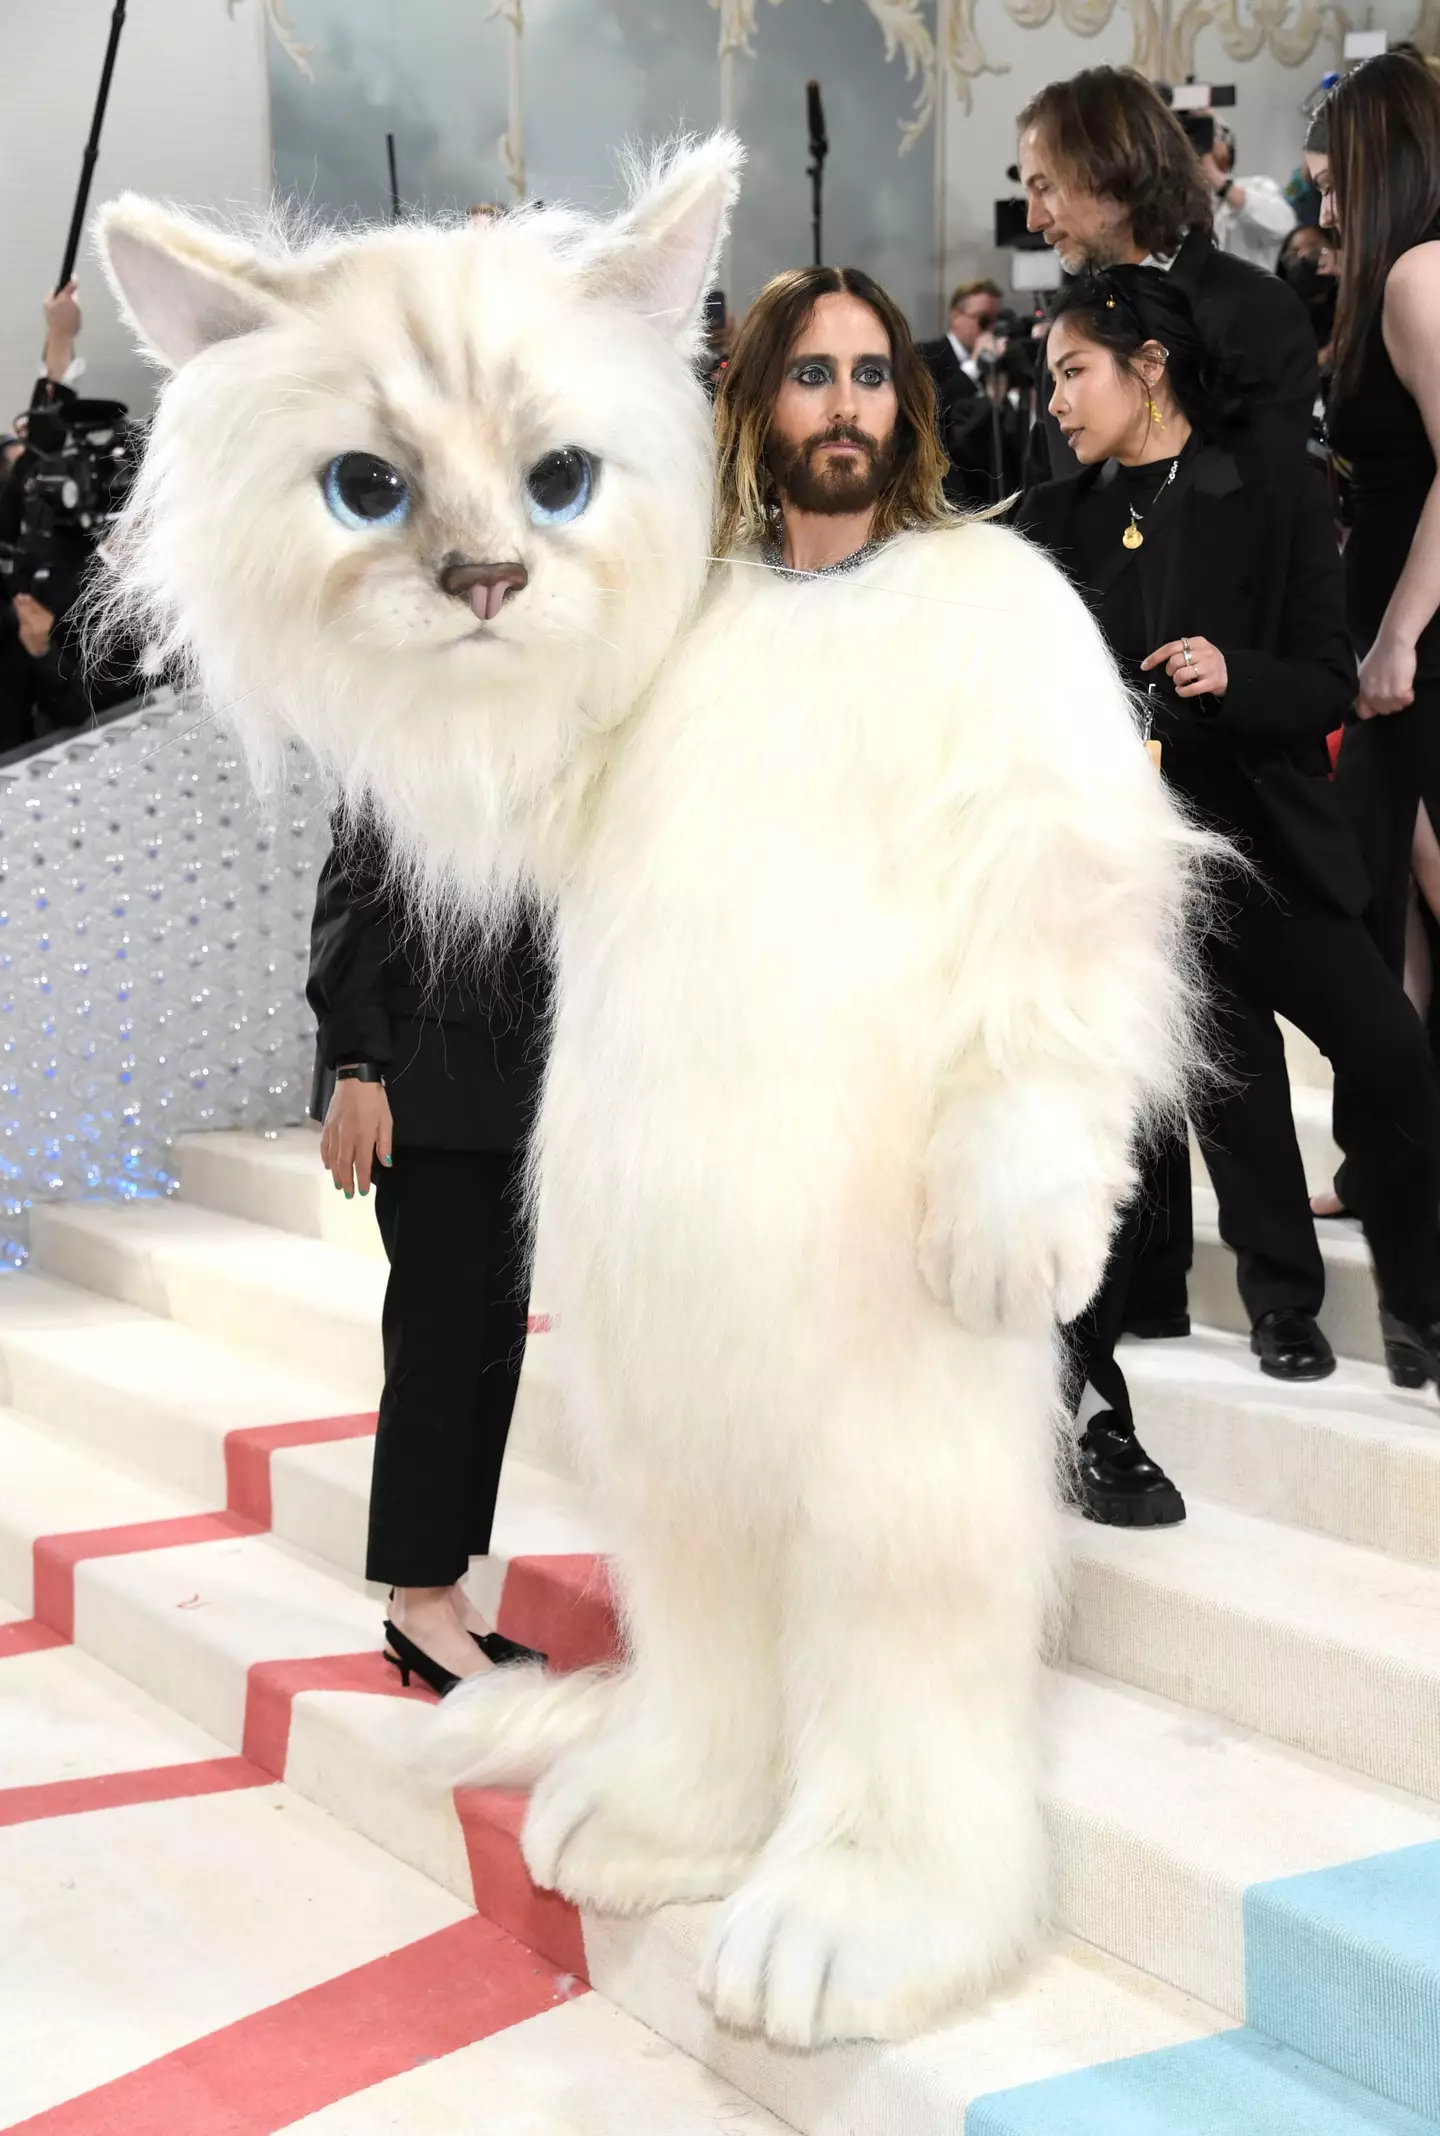 Someone came to the Met Gala dressed in a giant cat costume, it was Jared Leto.